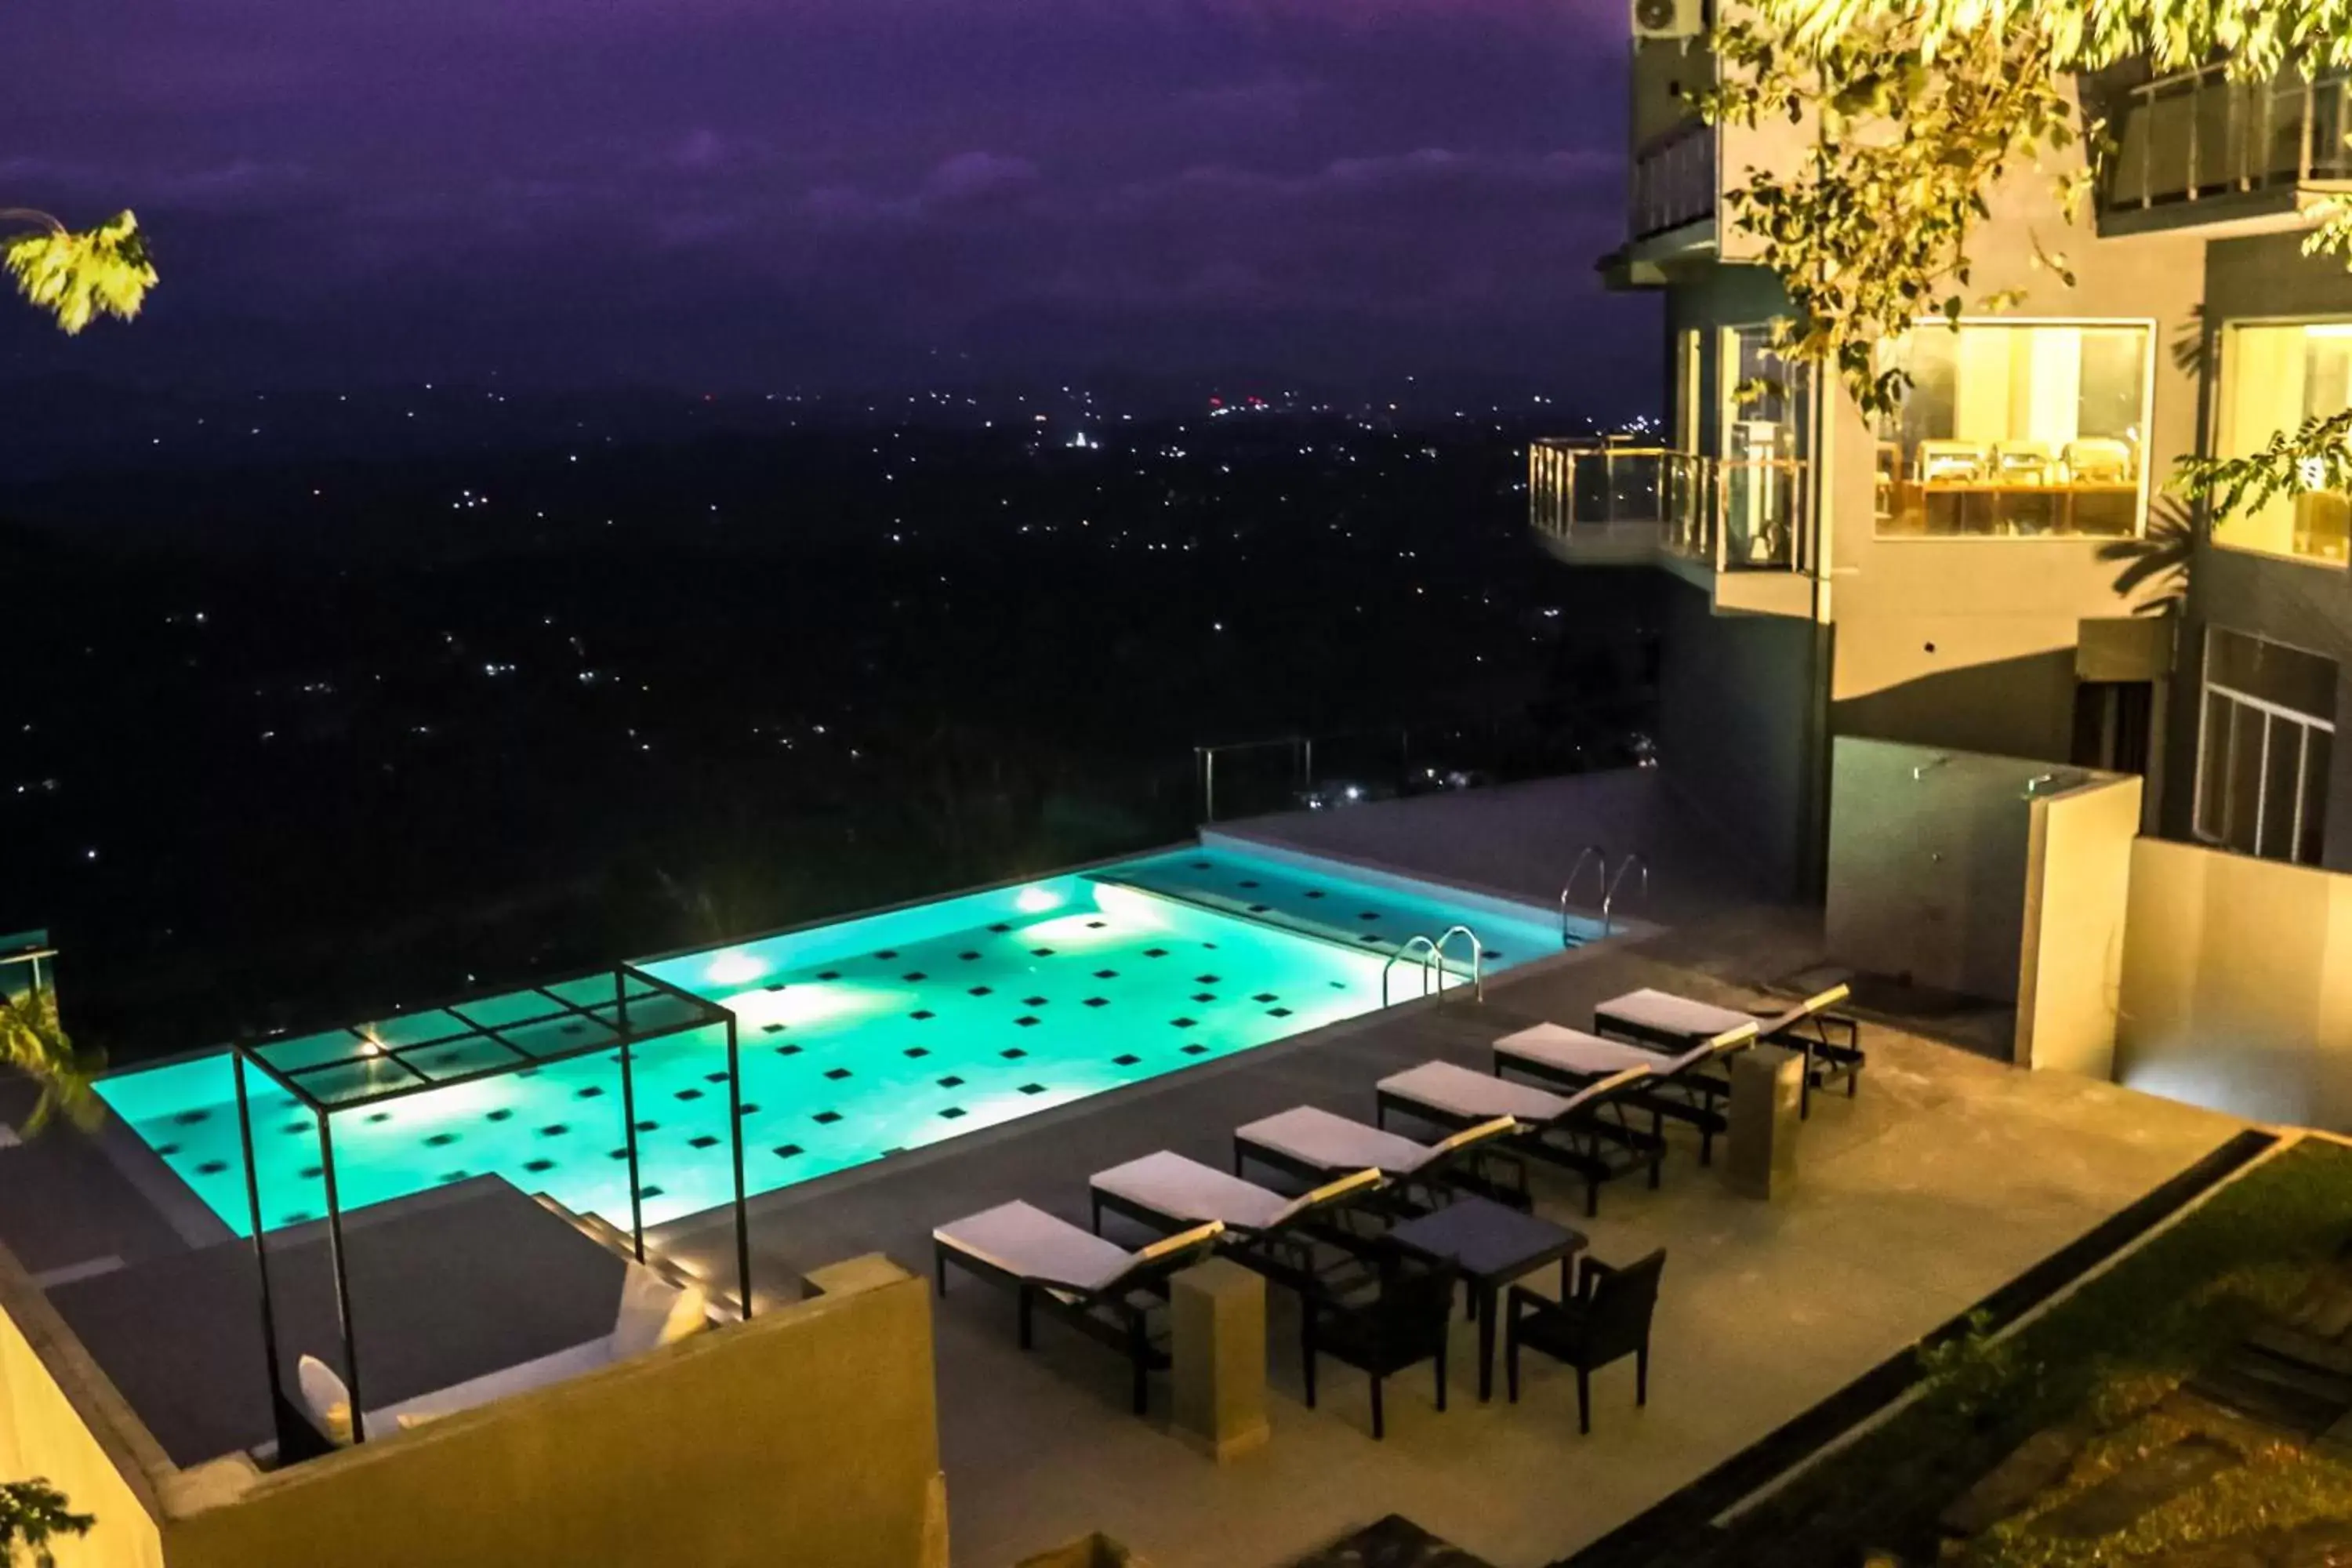 Pool View in Mount Blue Kandy